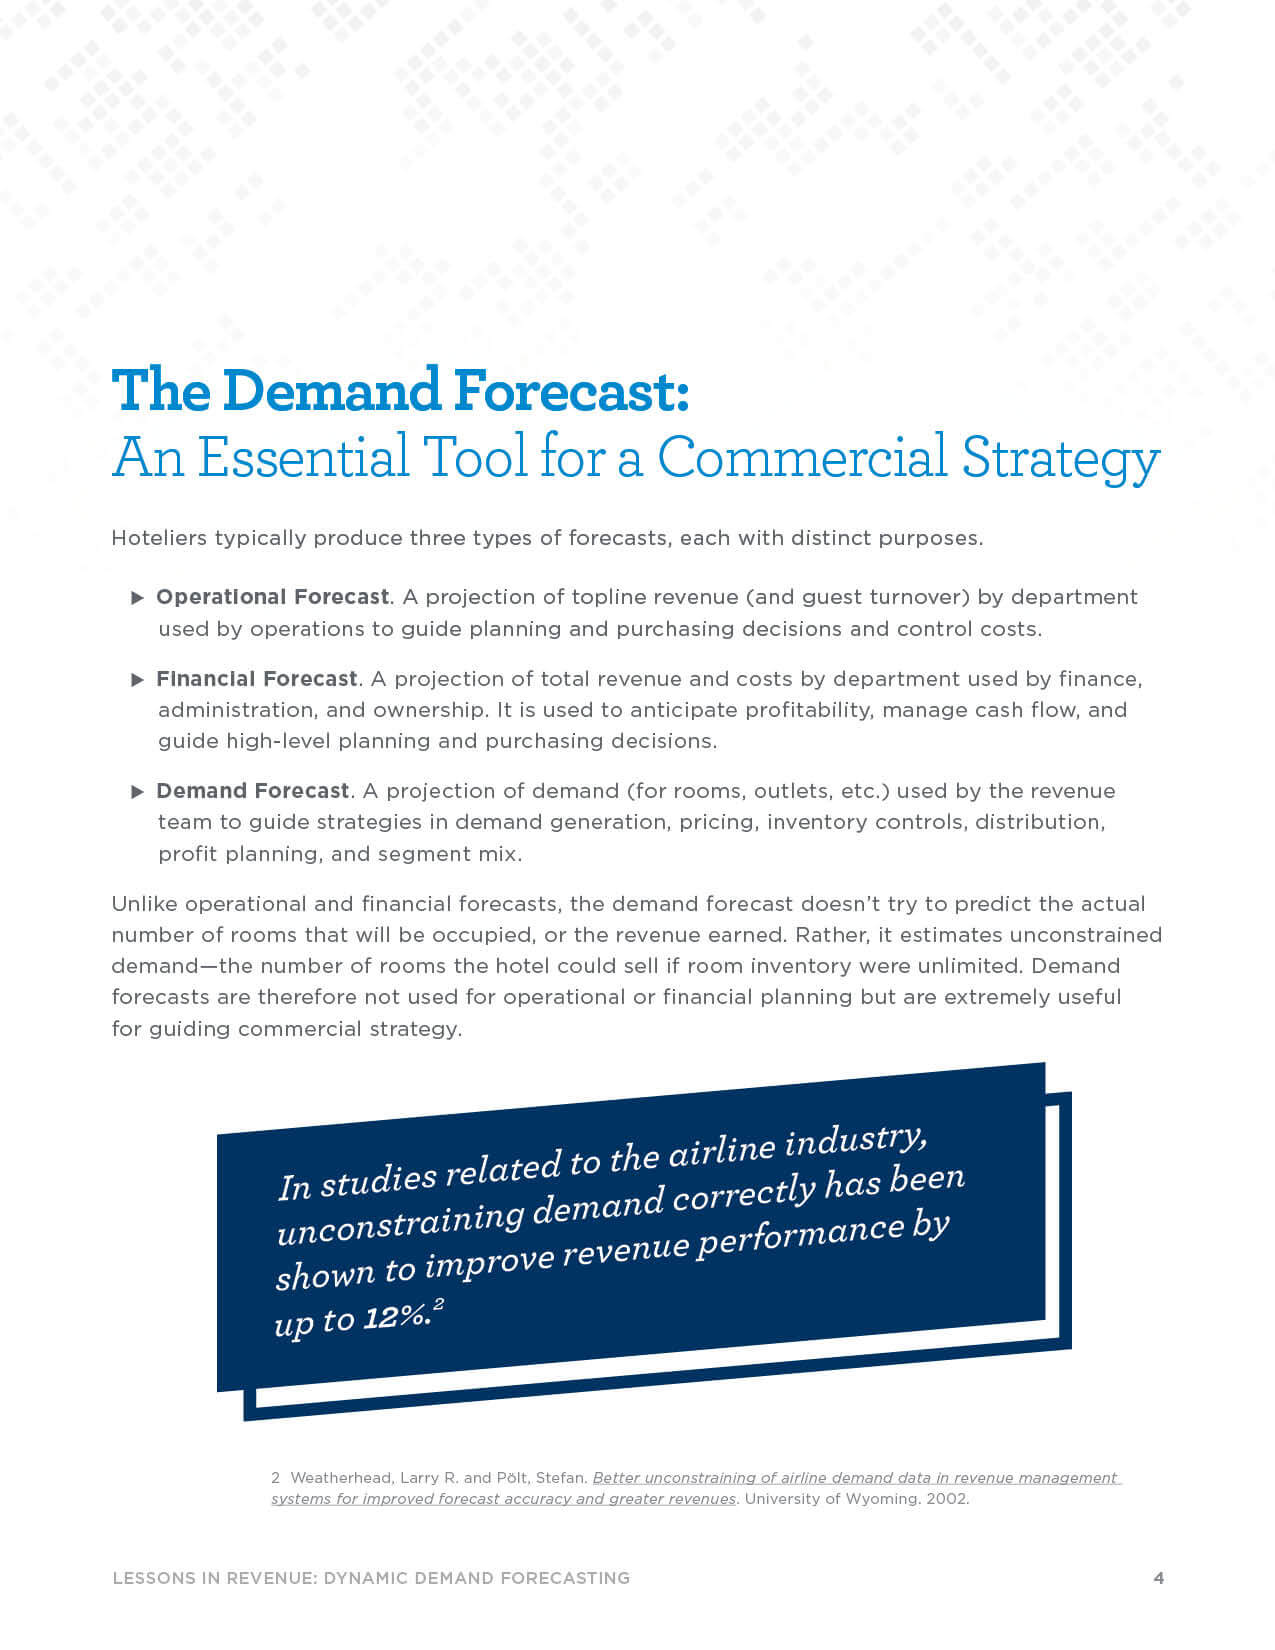 Page 4 - The Demand Forecast: An Essential Tool for a Commercial Strategy